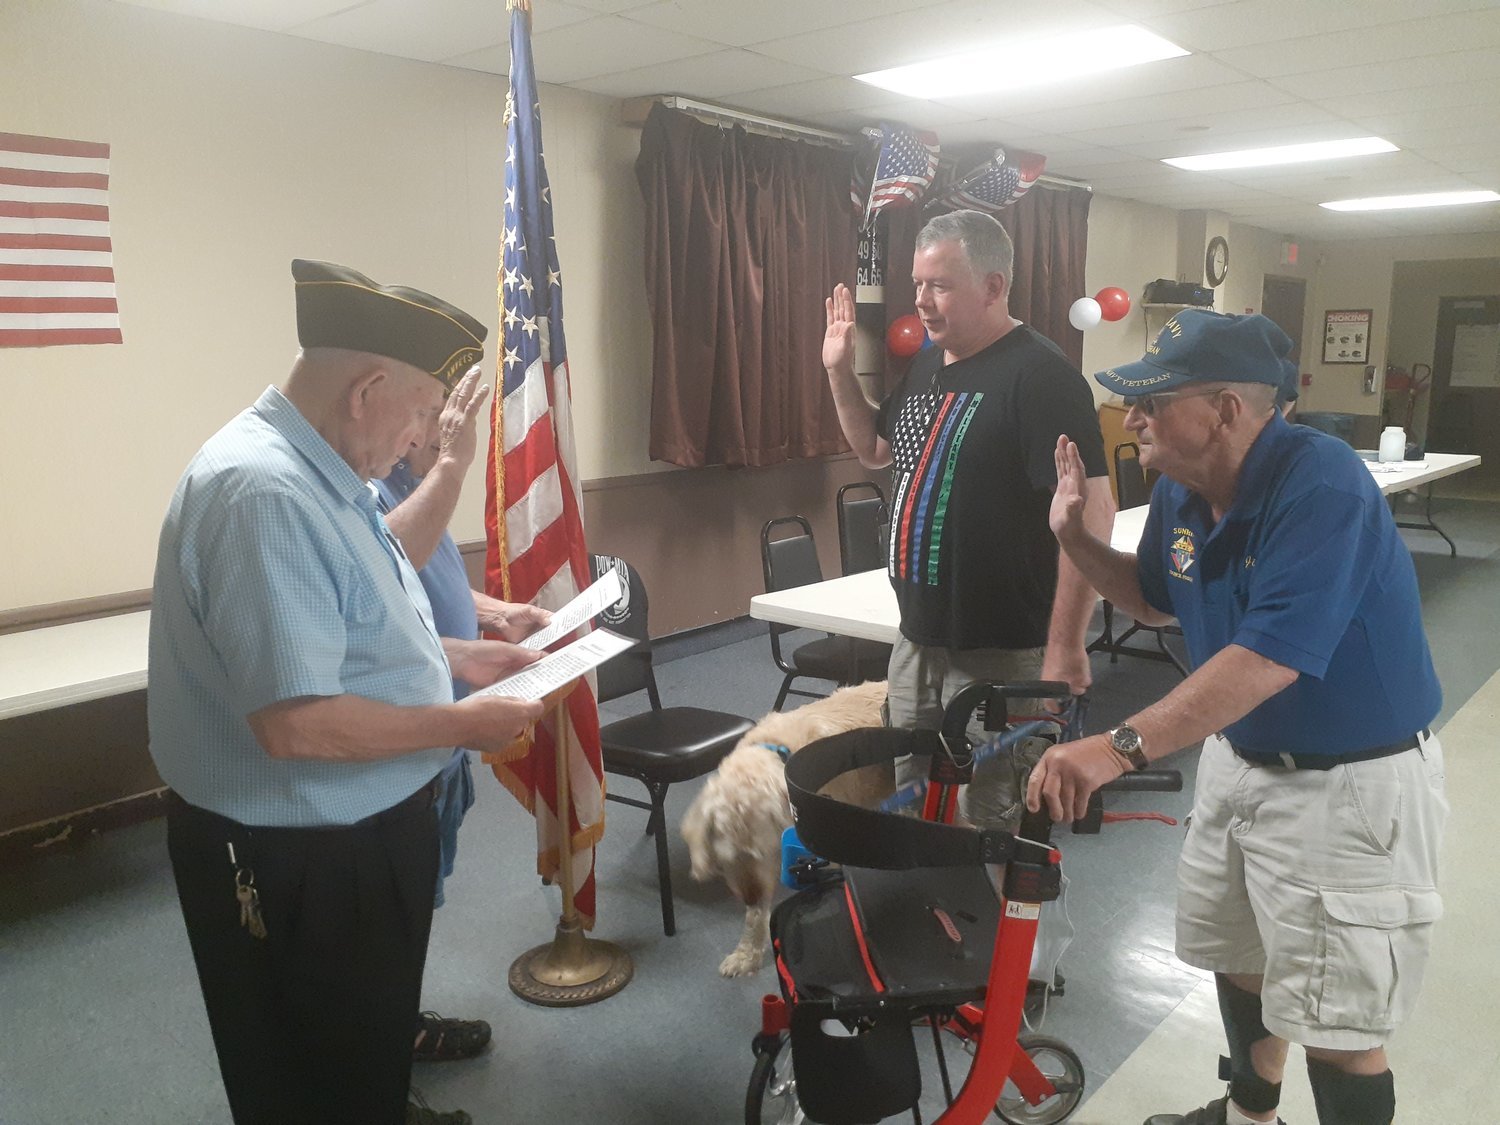 James Carr and Gene Smith are sworn in at AMVETS Post 18 on Carleton Avenue back in June. The Post will be hosting a Veterans Day ceremony at 11 a.m. on Nov. 11.